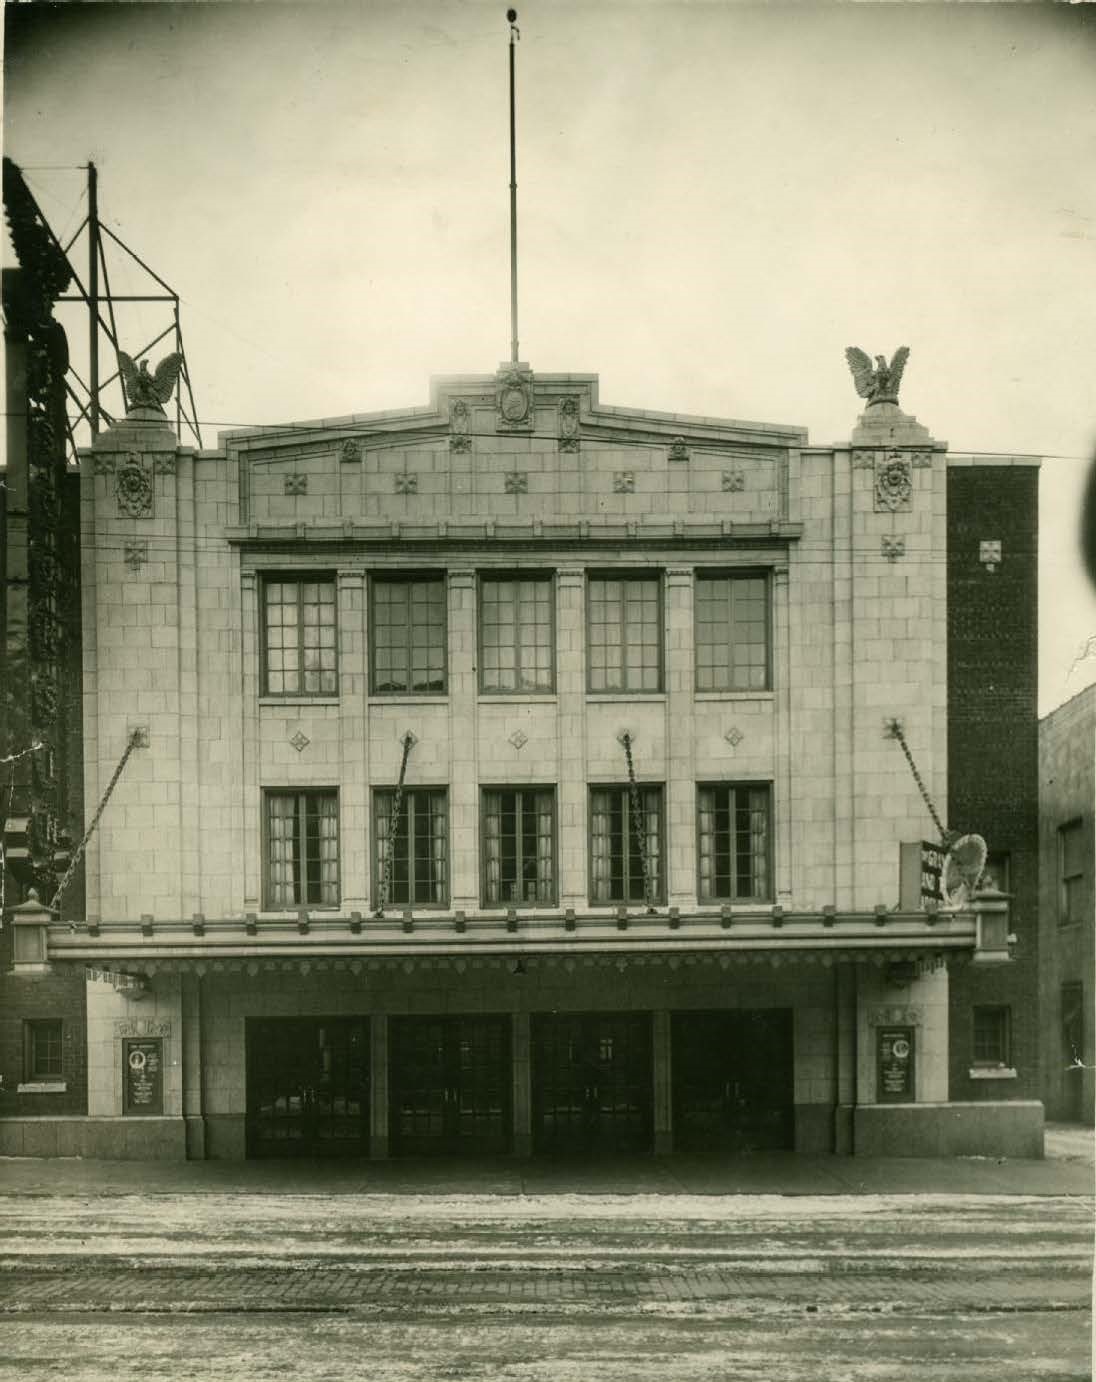 Exterior of Eau Claire’s Wisconsin Theater in 1928, a decade before the theater was remodeled and renamed the Badger Theater. Chippewa Valley Museum.